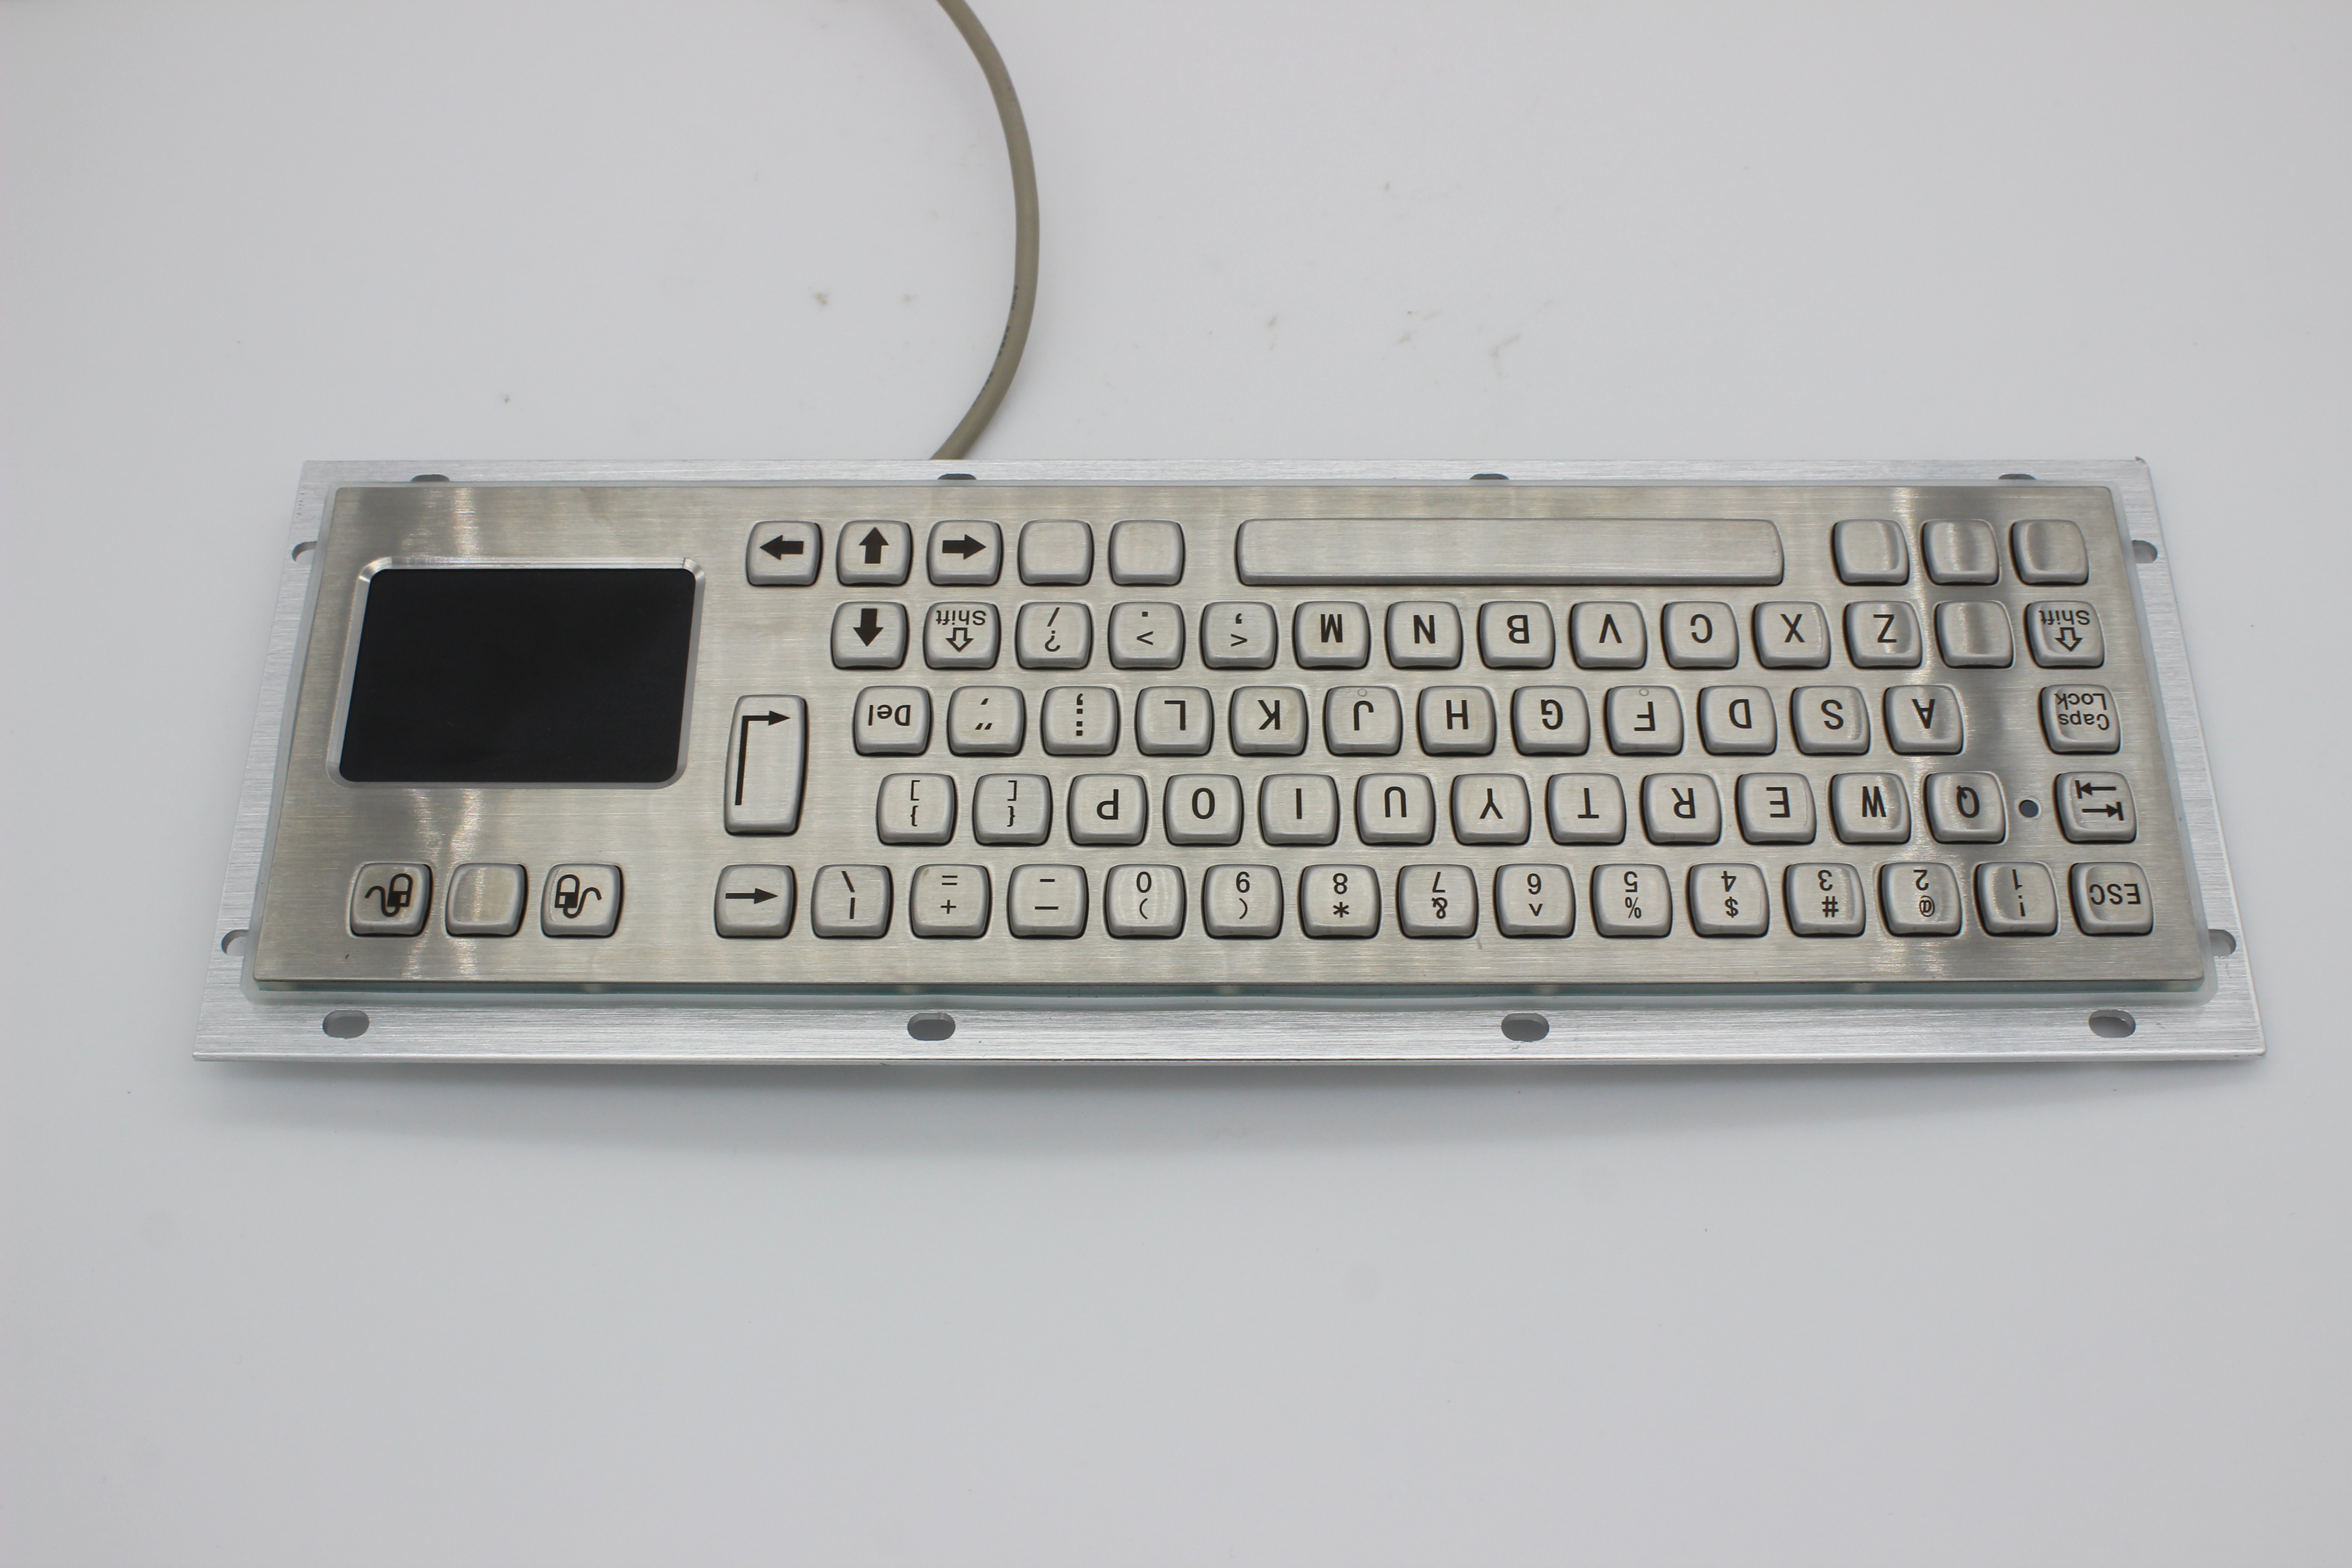 K17 metal keyboad with touchpad SPC330AM (1)_1080